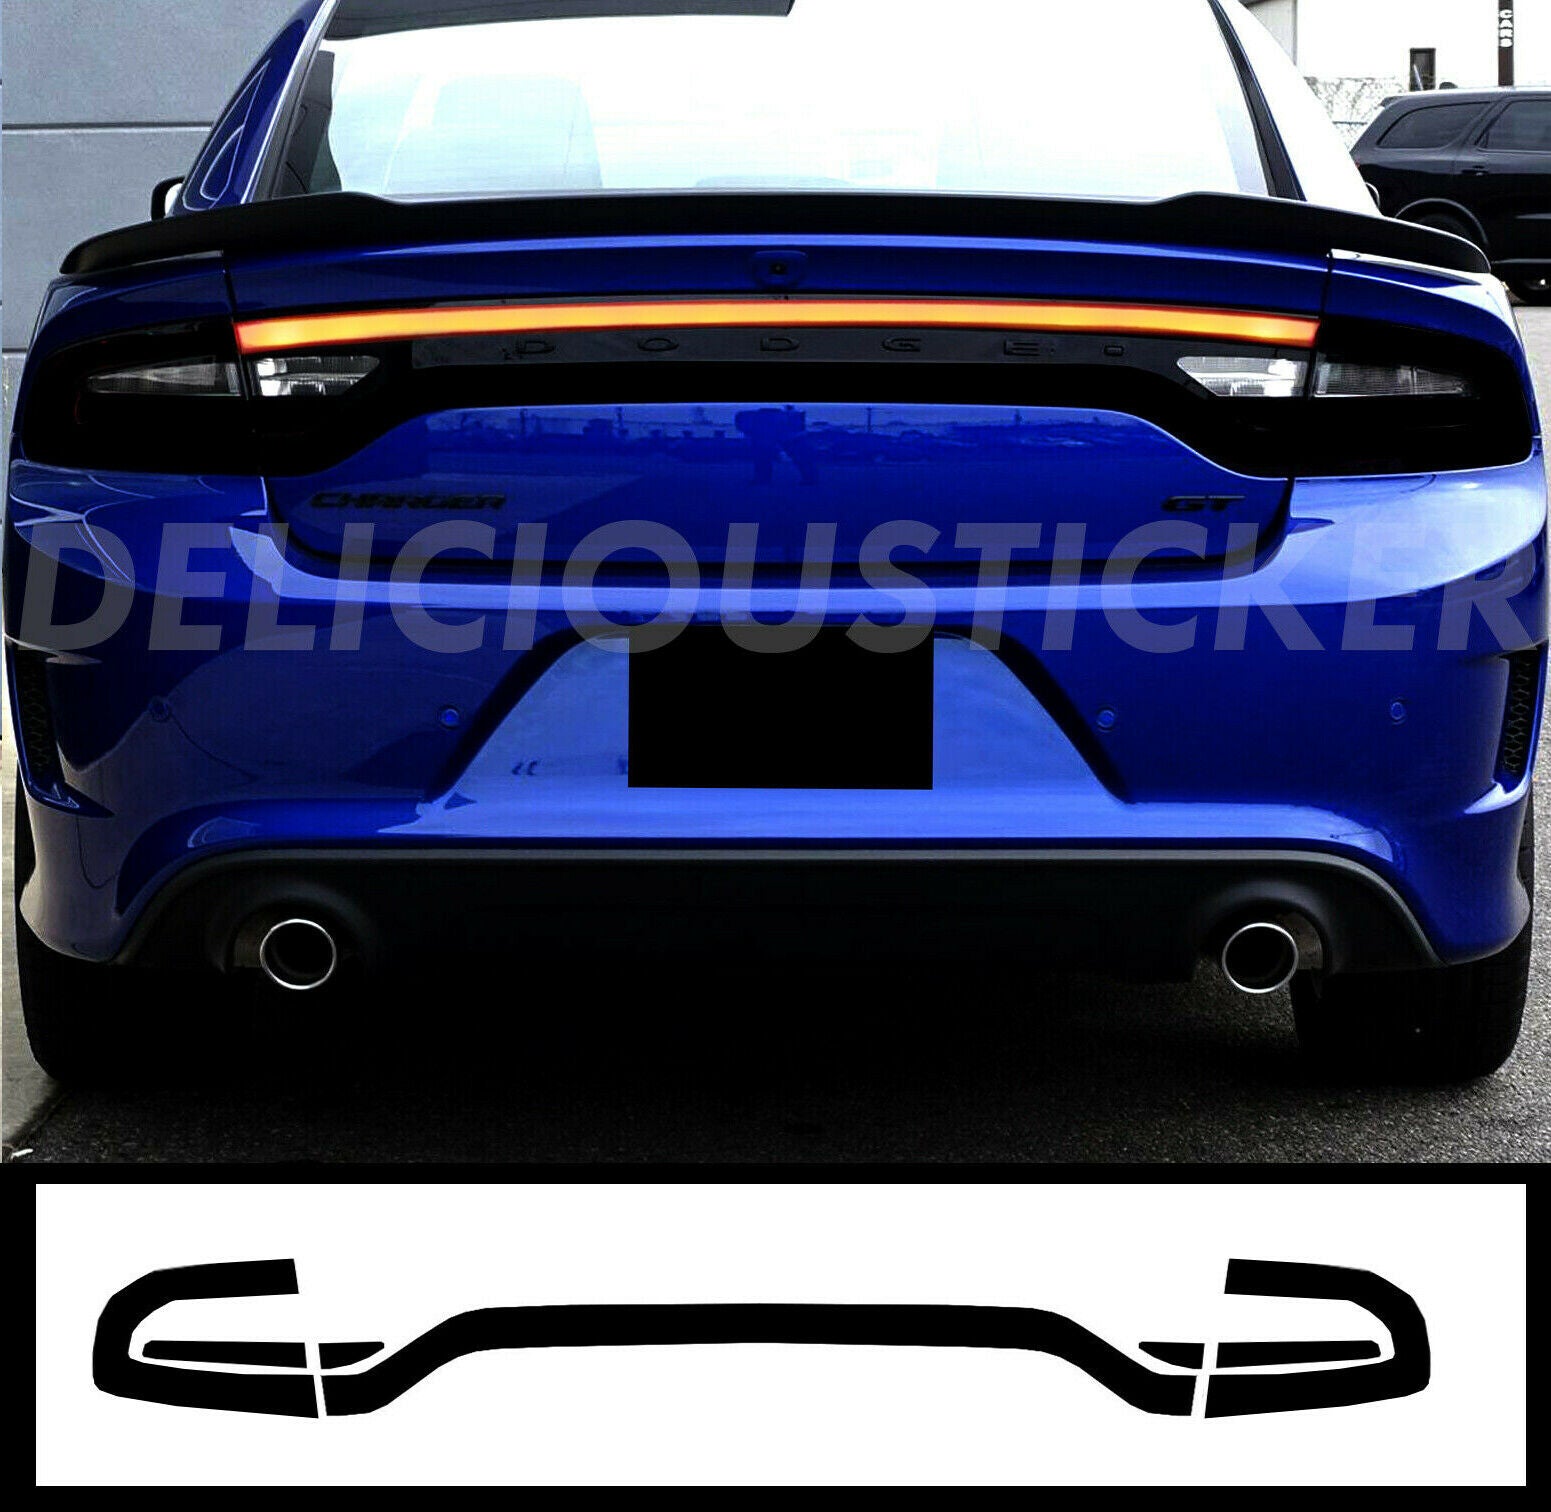 Black RaceTrack Tail Light Decal Overlays STYLE J (Fits For: 2015-2022 Dodge Charger)